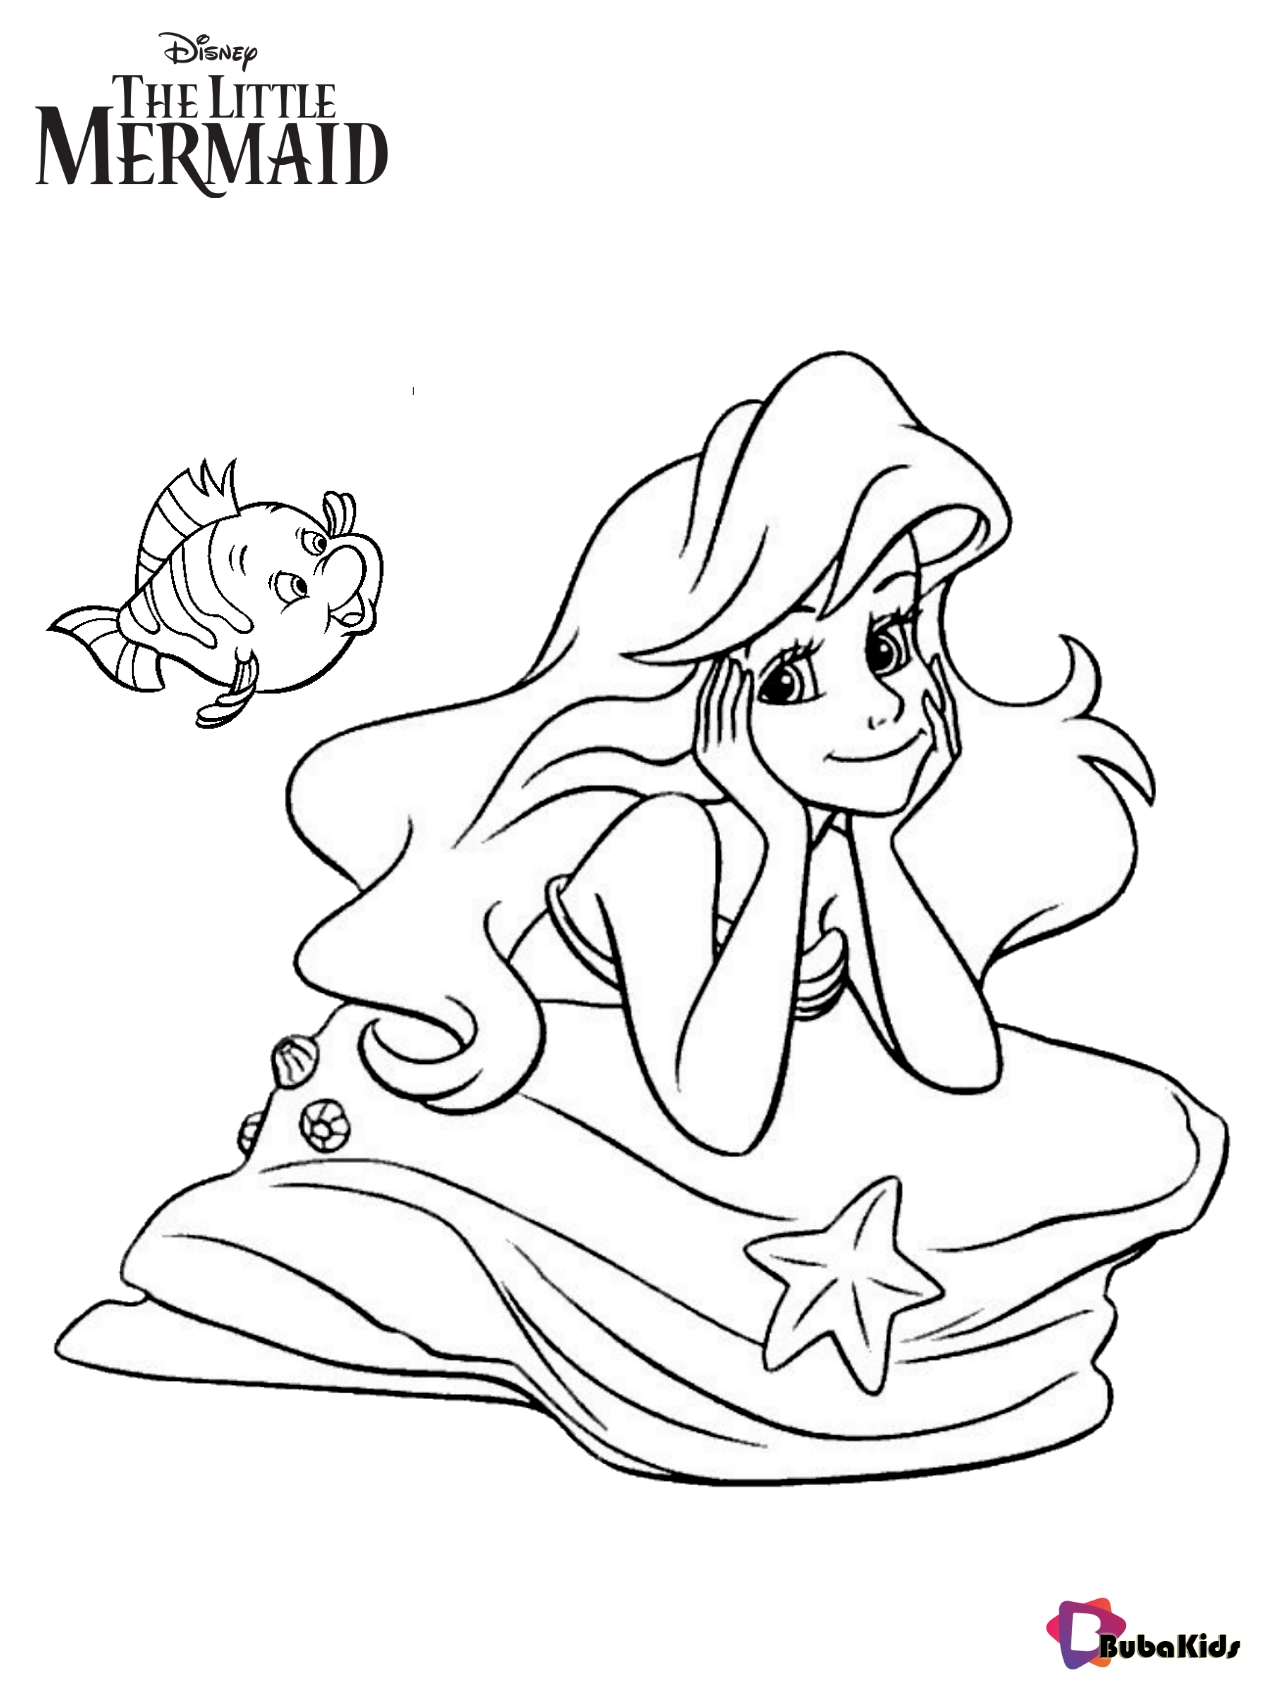 Ariel dreaming the little mermaid coloring pages Wallpaper